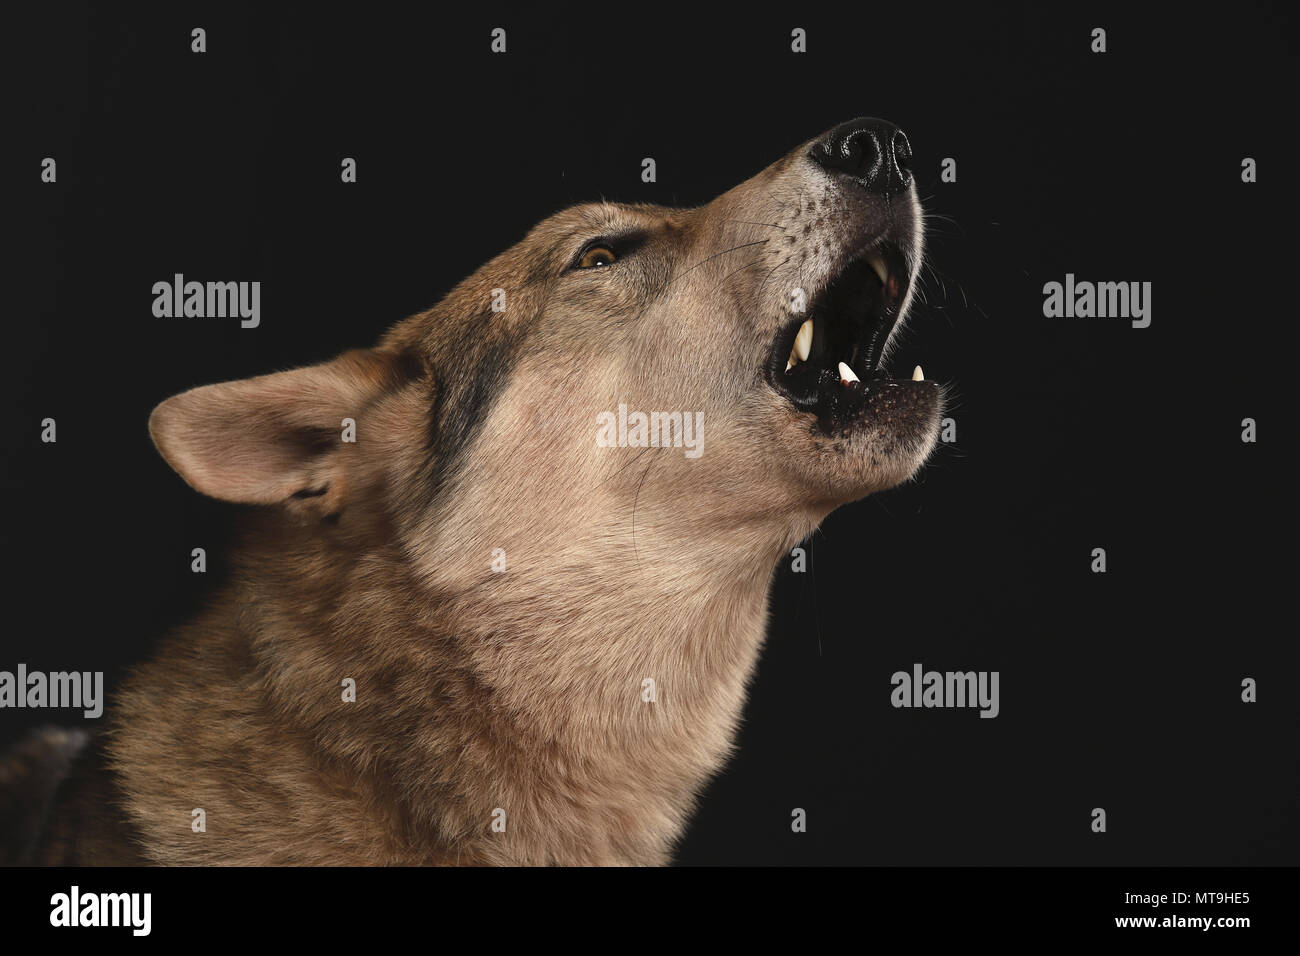 Czechoslovakian Wolfdog. Portrait of adult dog, howling. Studio picture against a black background. Germany Stock Photo